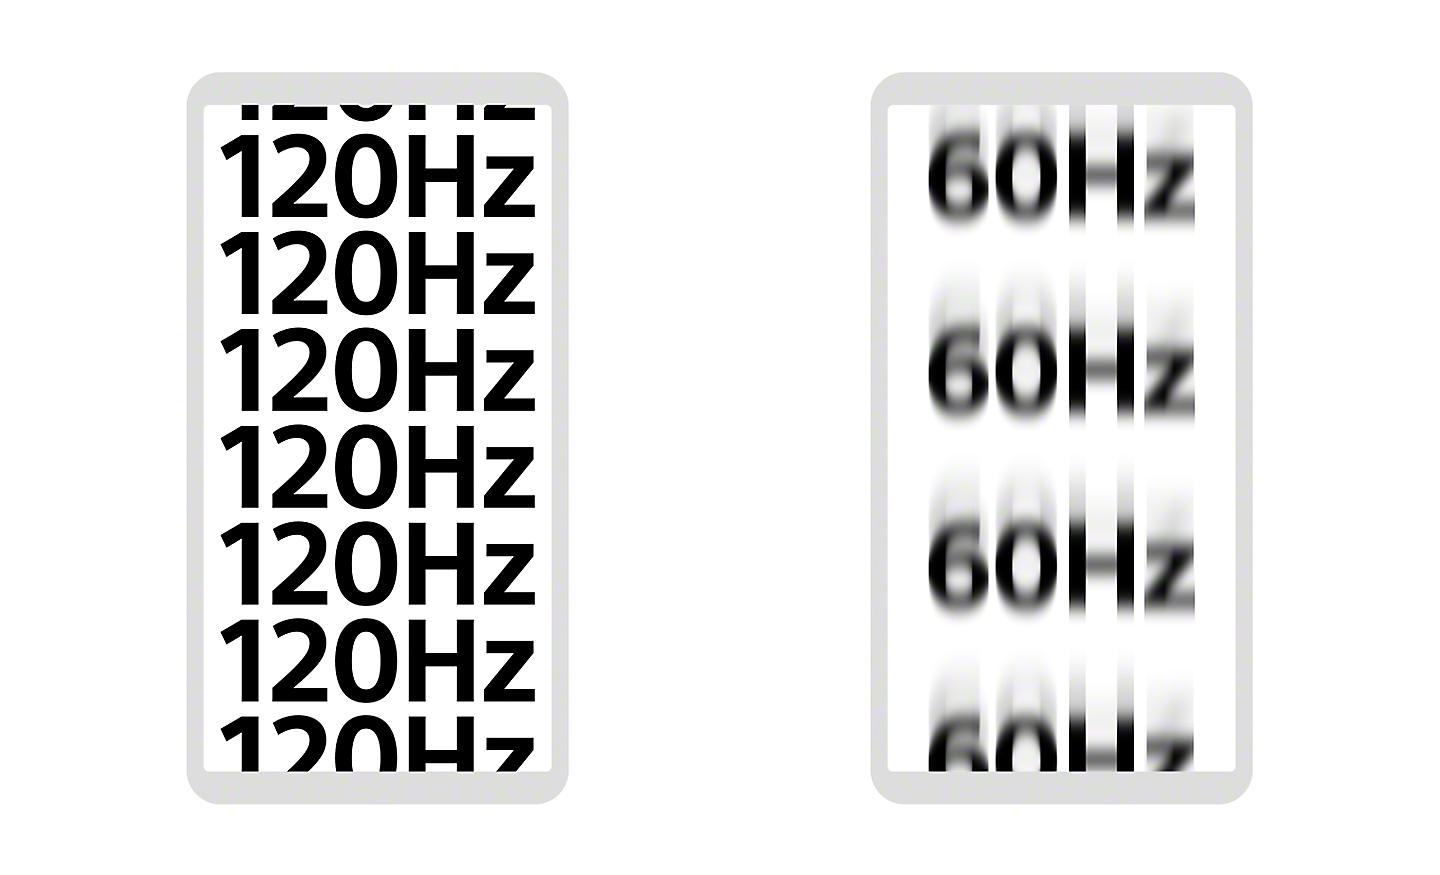 Illustration of two smartphones - one displays "120Hz" multiple times in sharply defined text, the other displays 60Hz in blurred text